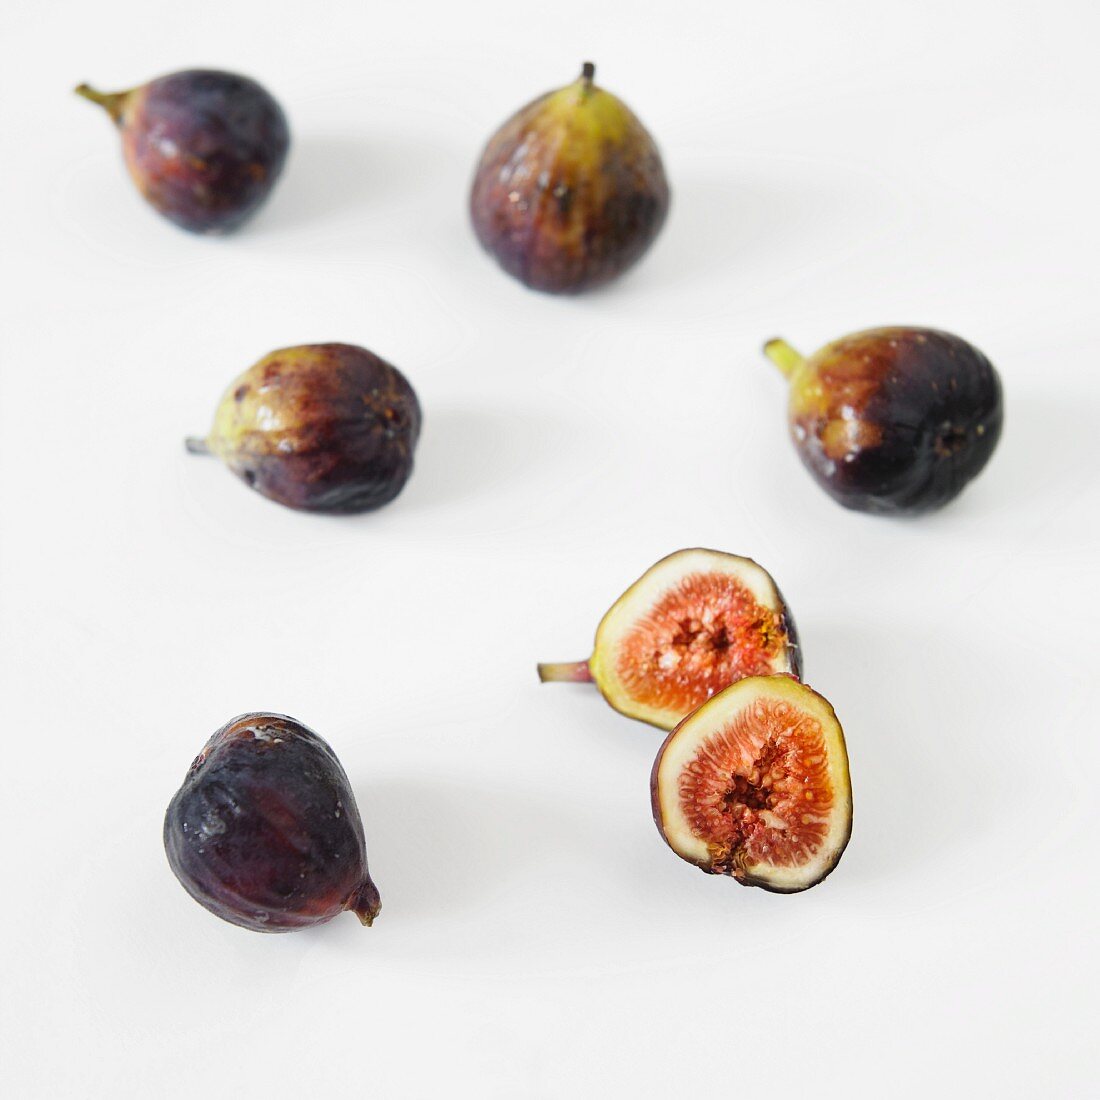 Fresh Figs on White; One Halved